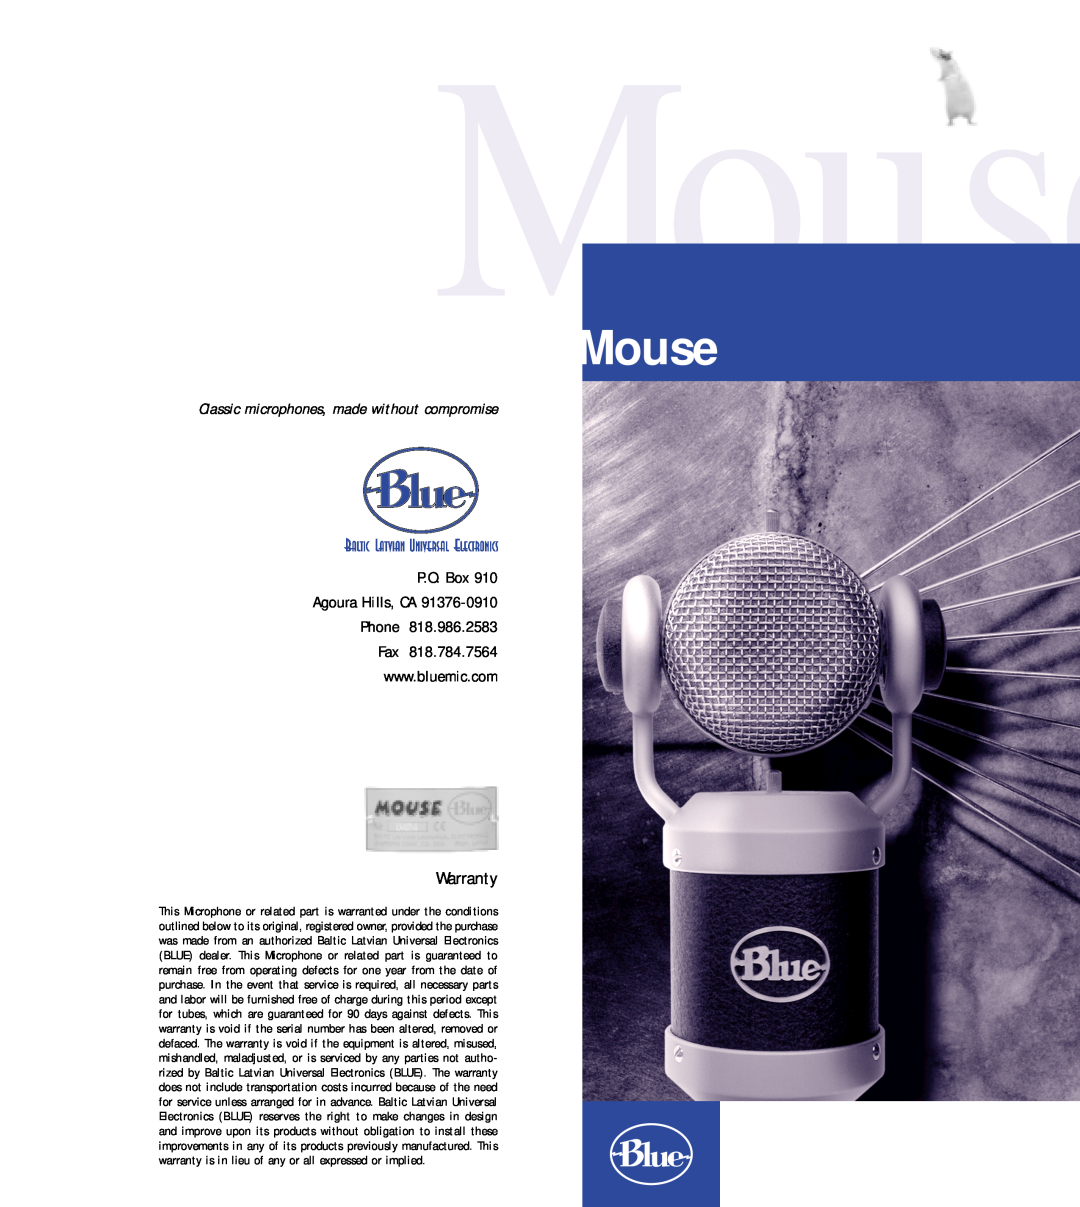 Blue Microphones Mouse warranty Classic microphones, made without compromise, Warranty 